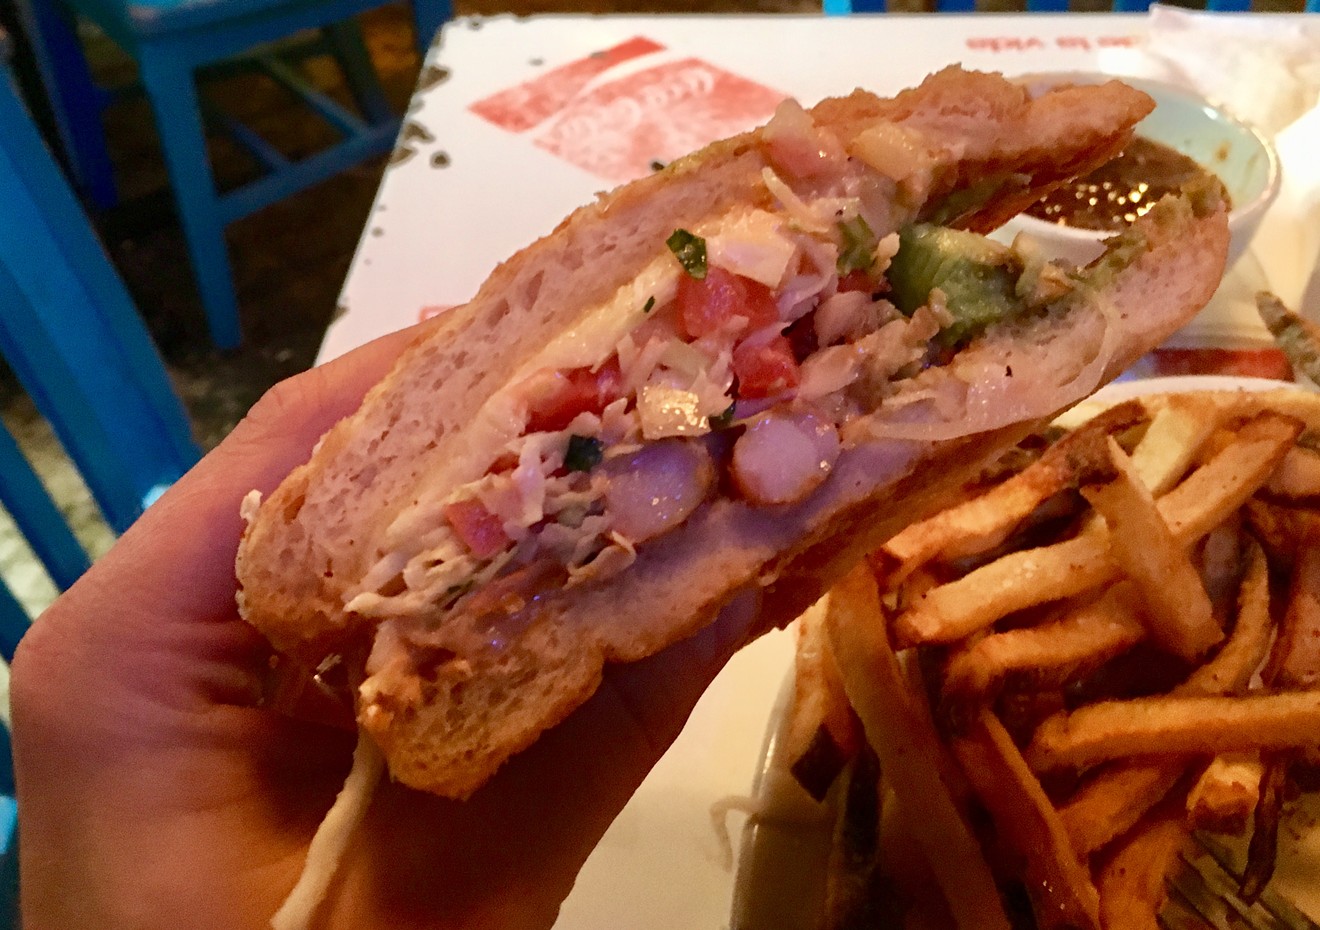 The tortas at Palpas come with shrimp, or fried or grilled fish at Palapas for $12 (with fries).